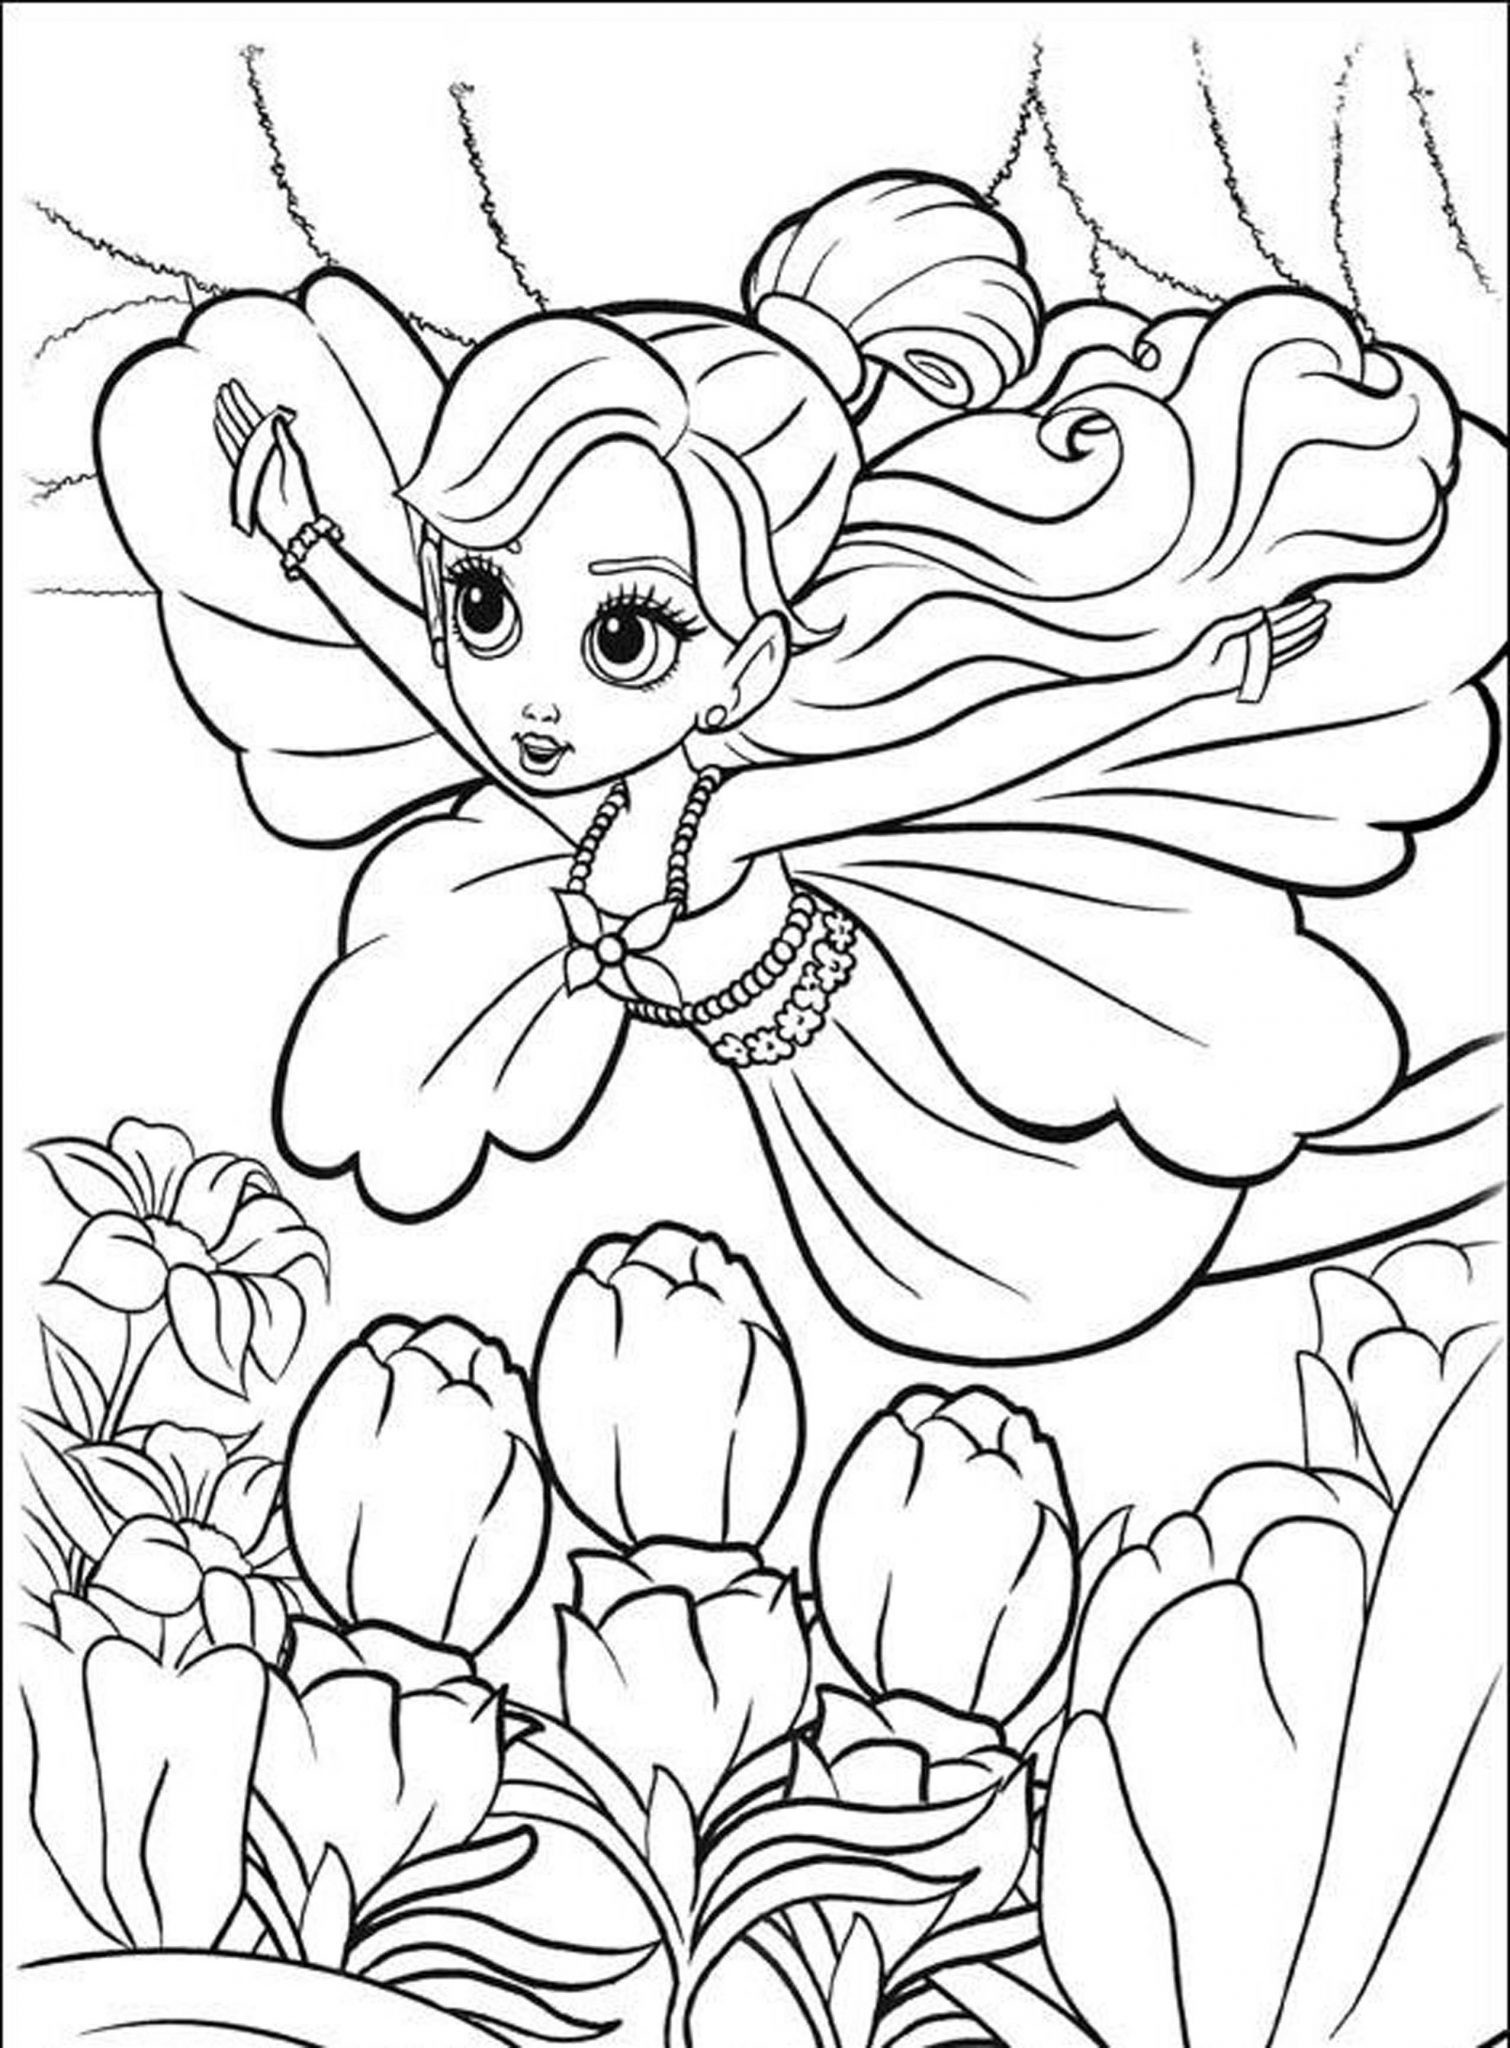 Princess Coloring Pages For Girls
 Print & Download Coloring Pages for Girls Re mend a